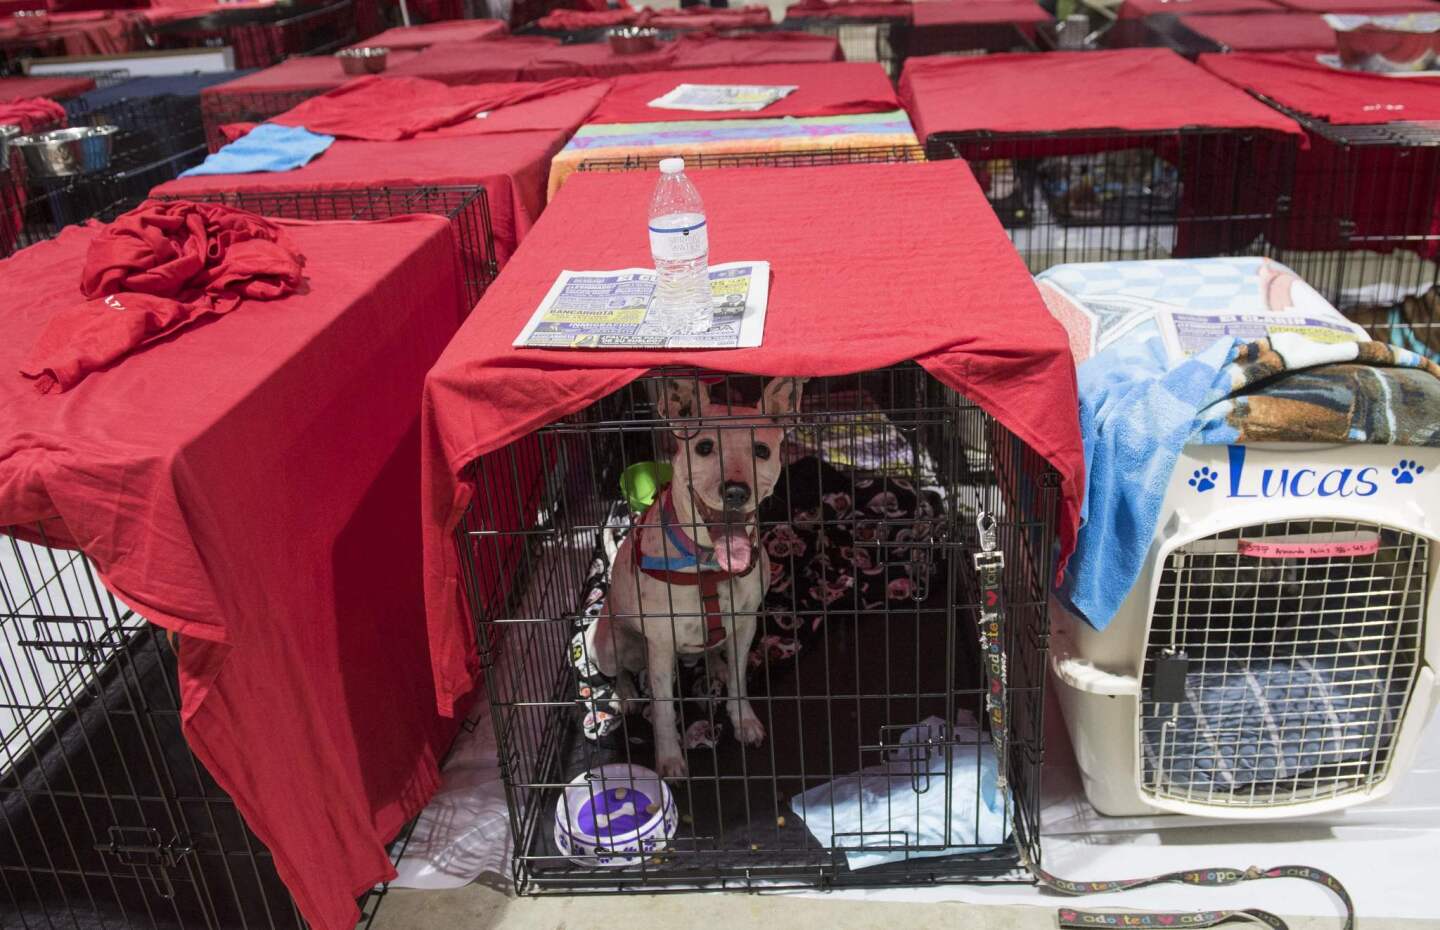 Dogs sit inside their cages as hundreds of people gather in a pet-friendly emergency shelter at the Miami-Dade County Fair Expo Center in Miami on Sept. 8, 2017, ahead of Hurricane Irma.